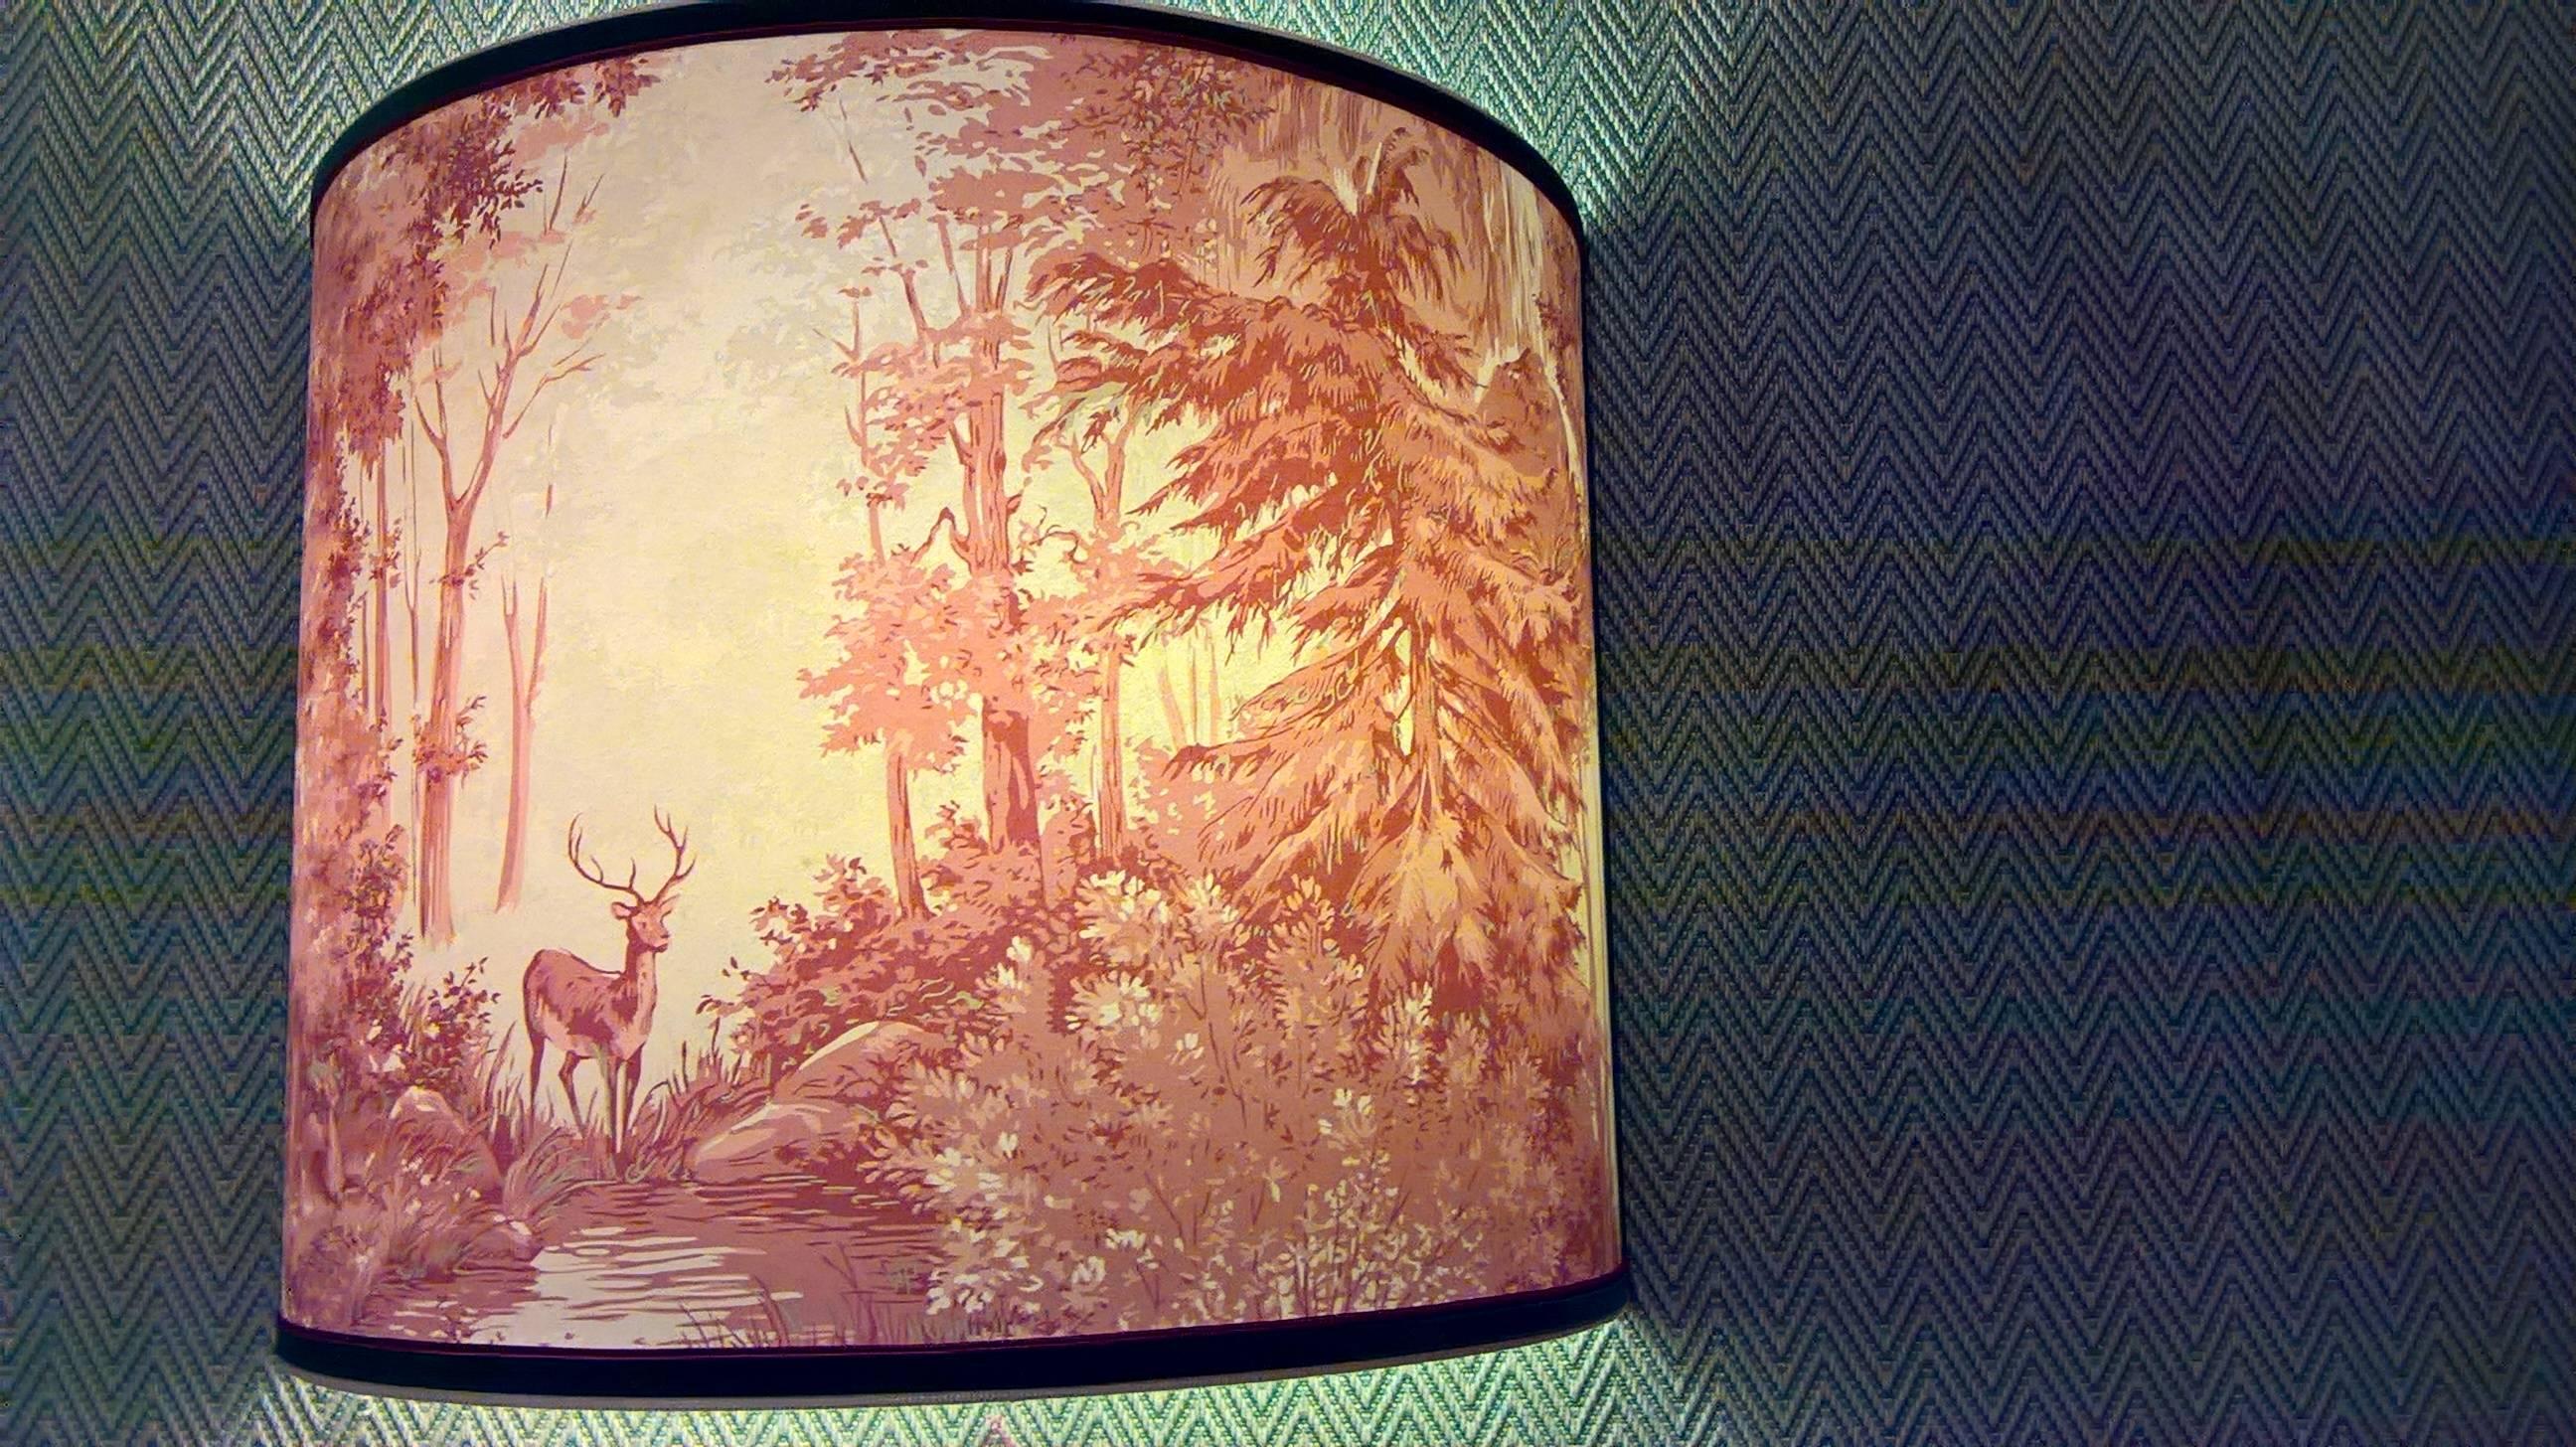 Large handmade lampshade made of wallpaper with a hunting scene in red and beige in the style of black forest. Made by hand in Austria. 
Fixed with green and red paspol. Two handmade iron angles to supply electricity will be delivered with the